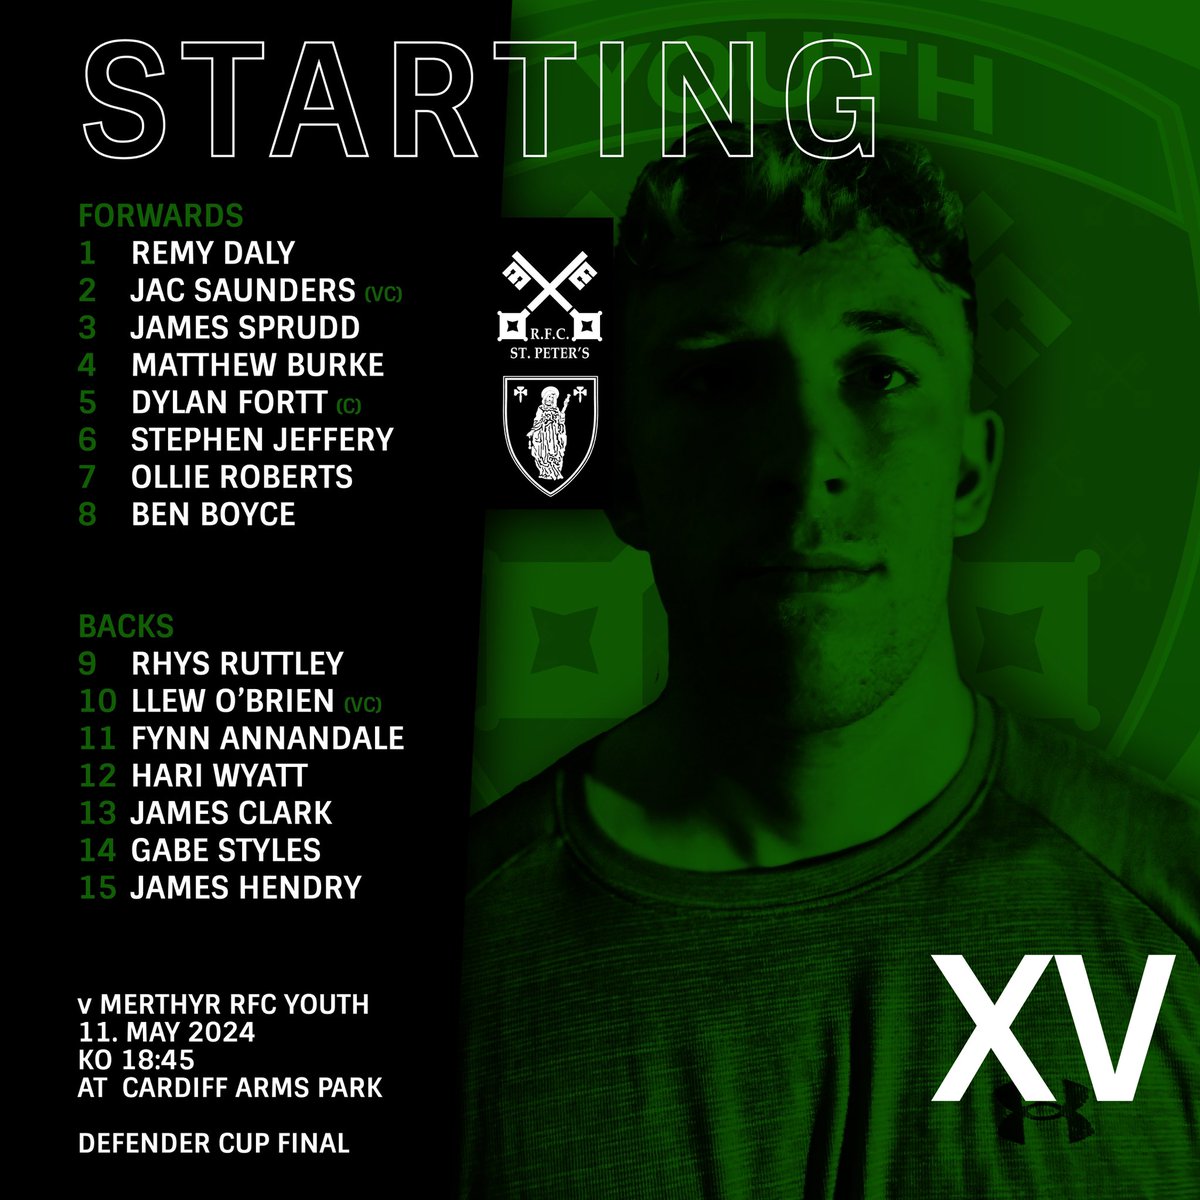 Starting XV for tomorrow’s cup final: 🏉 @Young_ironmen 📆 11/05/2024 ⏰ 18:45hrs 🏟️ Cardiff Arms Park 🏆 @CardiffRugbyCup #grassroots #youth #cup #match #final #rugby #cardiff #wales @AllWalesSport